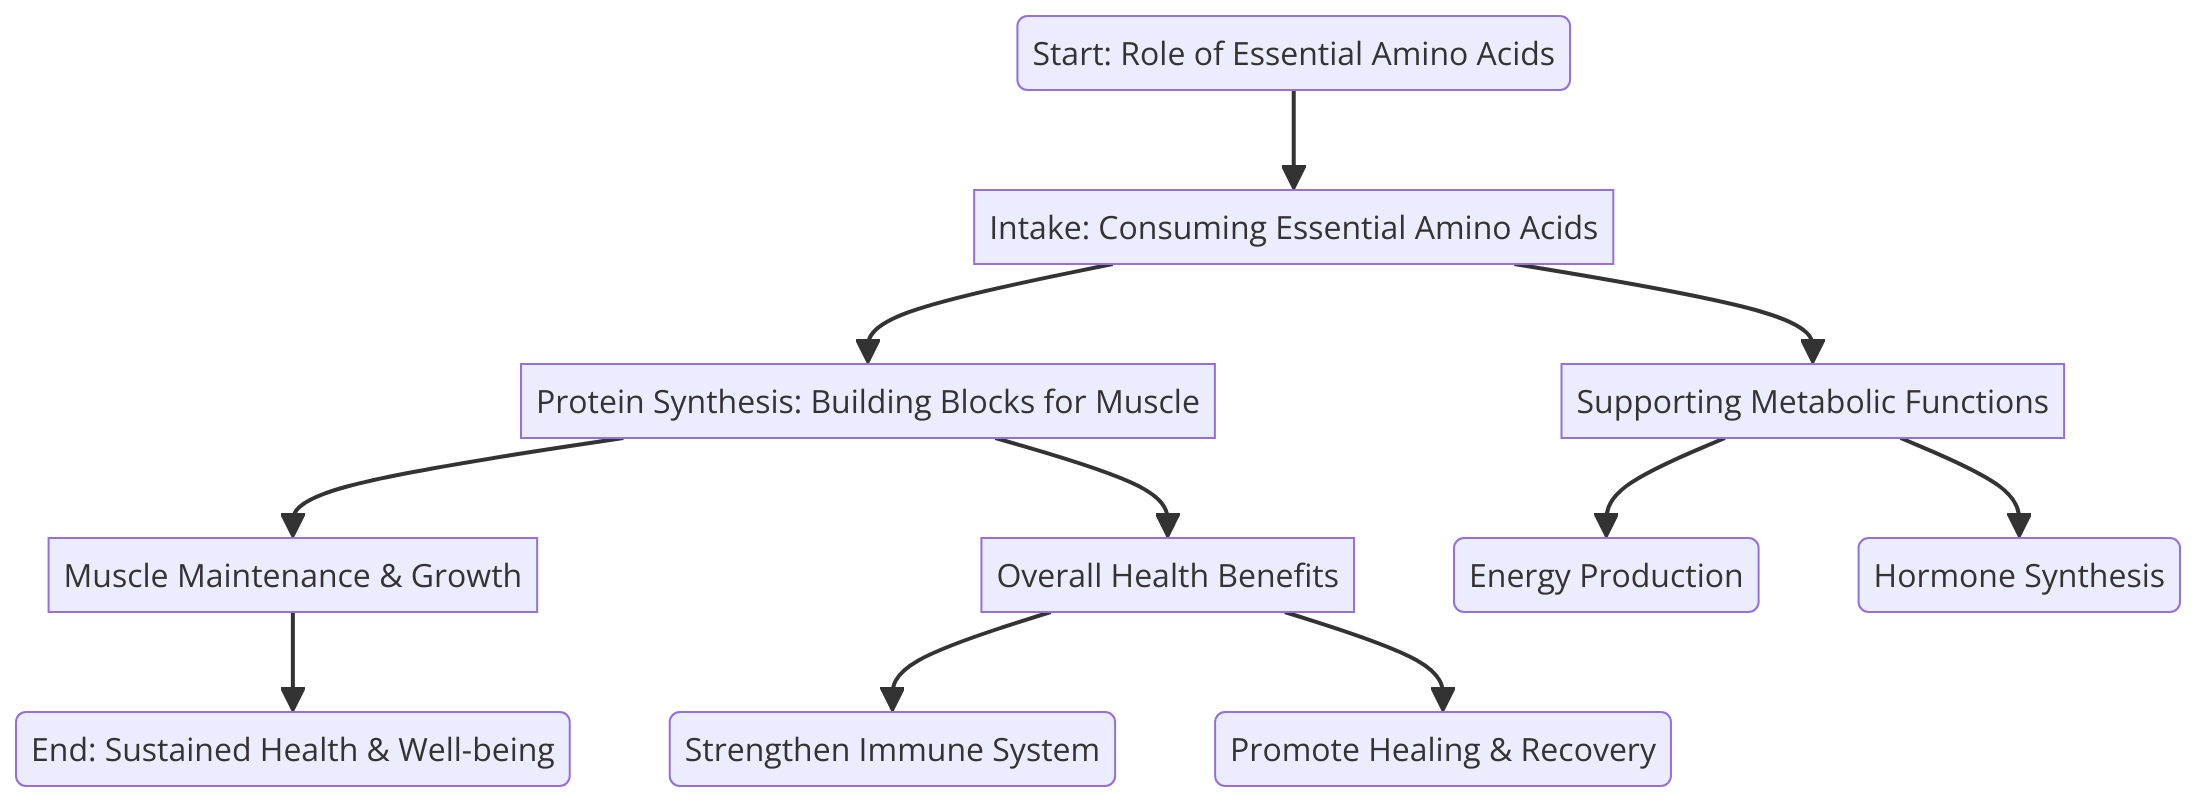 the role of essential amino acids in muscle maintenance and overall health